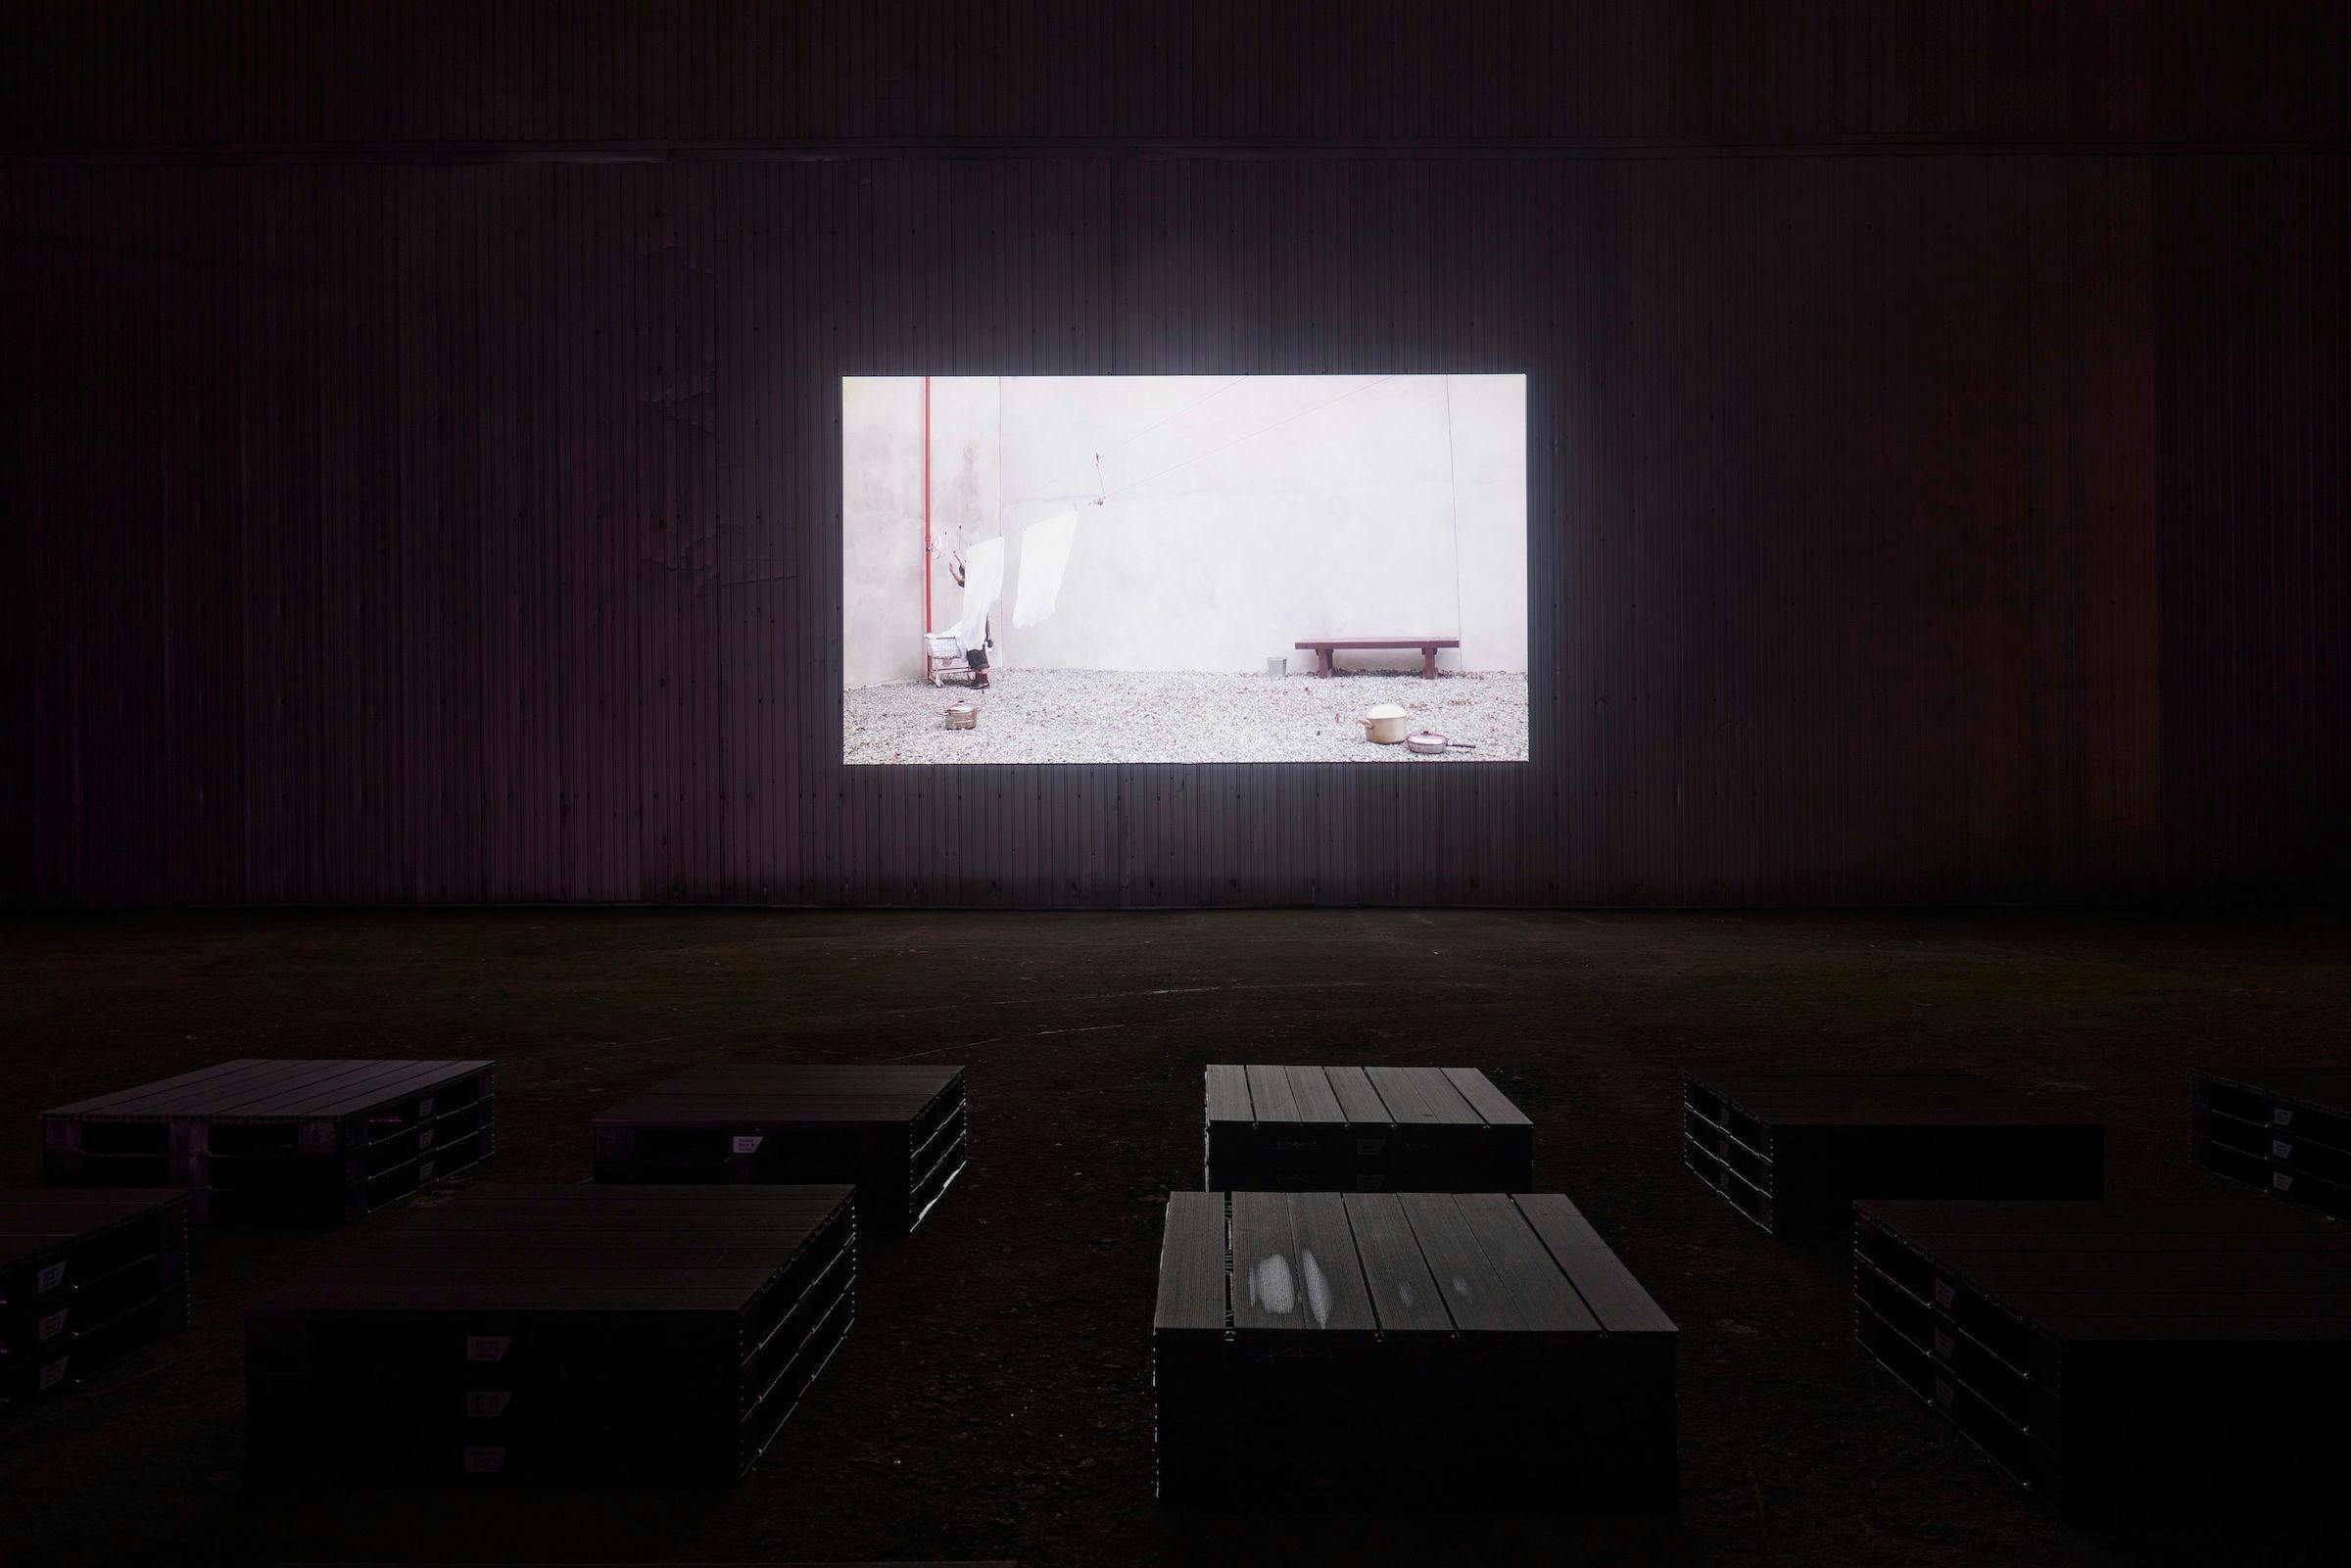 an installation of a video projection in an art gallery. The walls and floor are brown and there are a number of plan chest draws in front of the projector